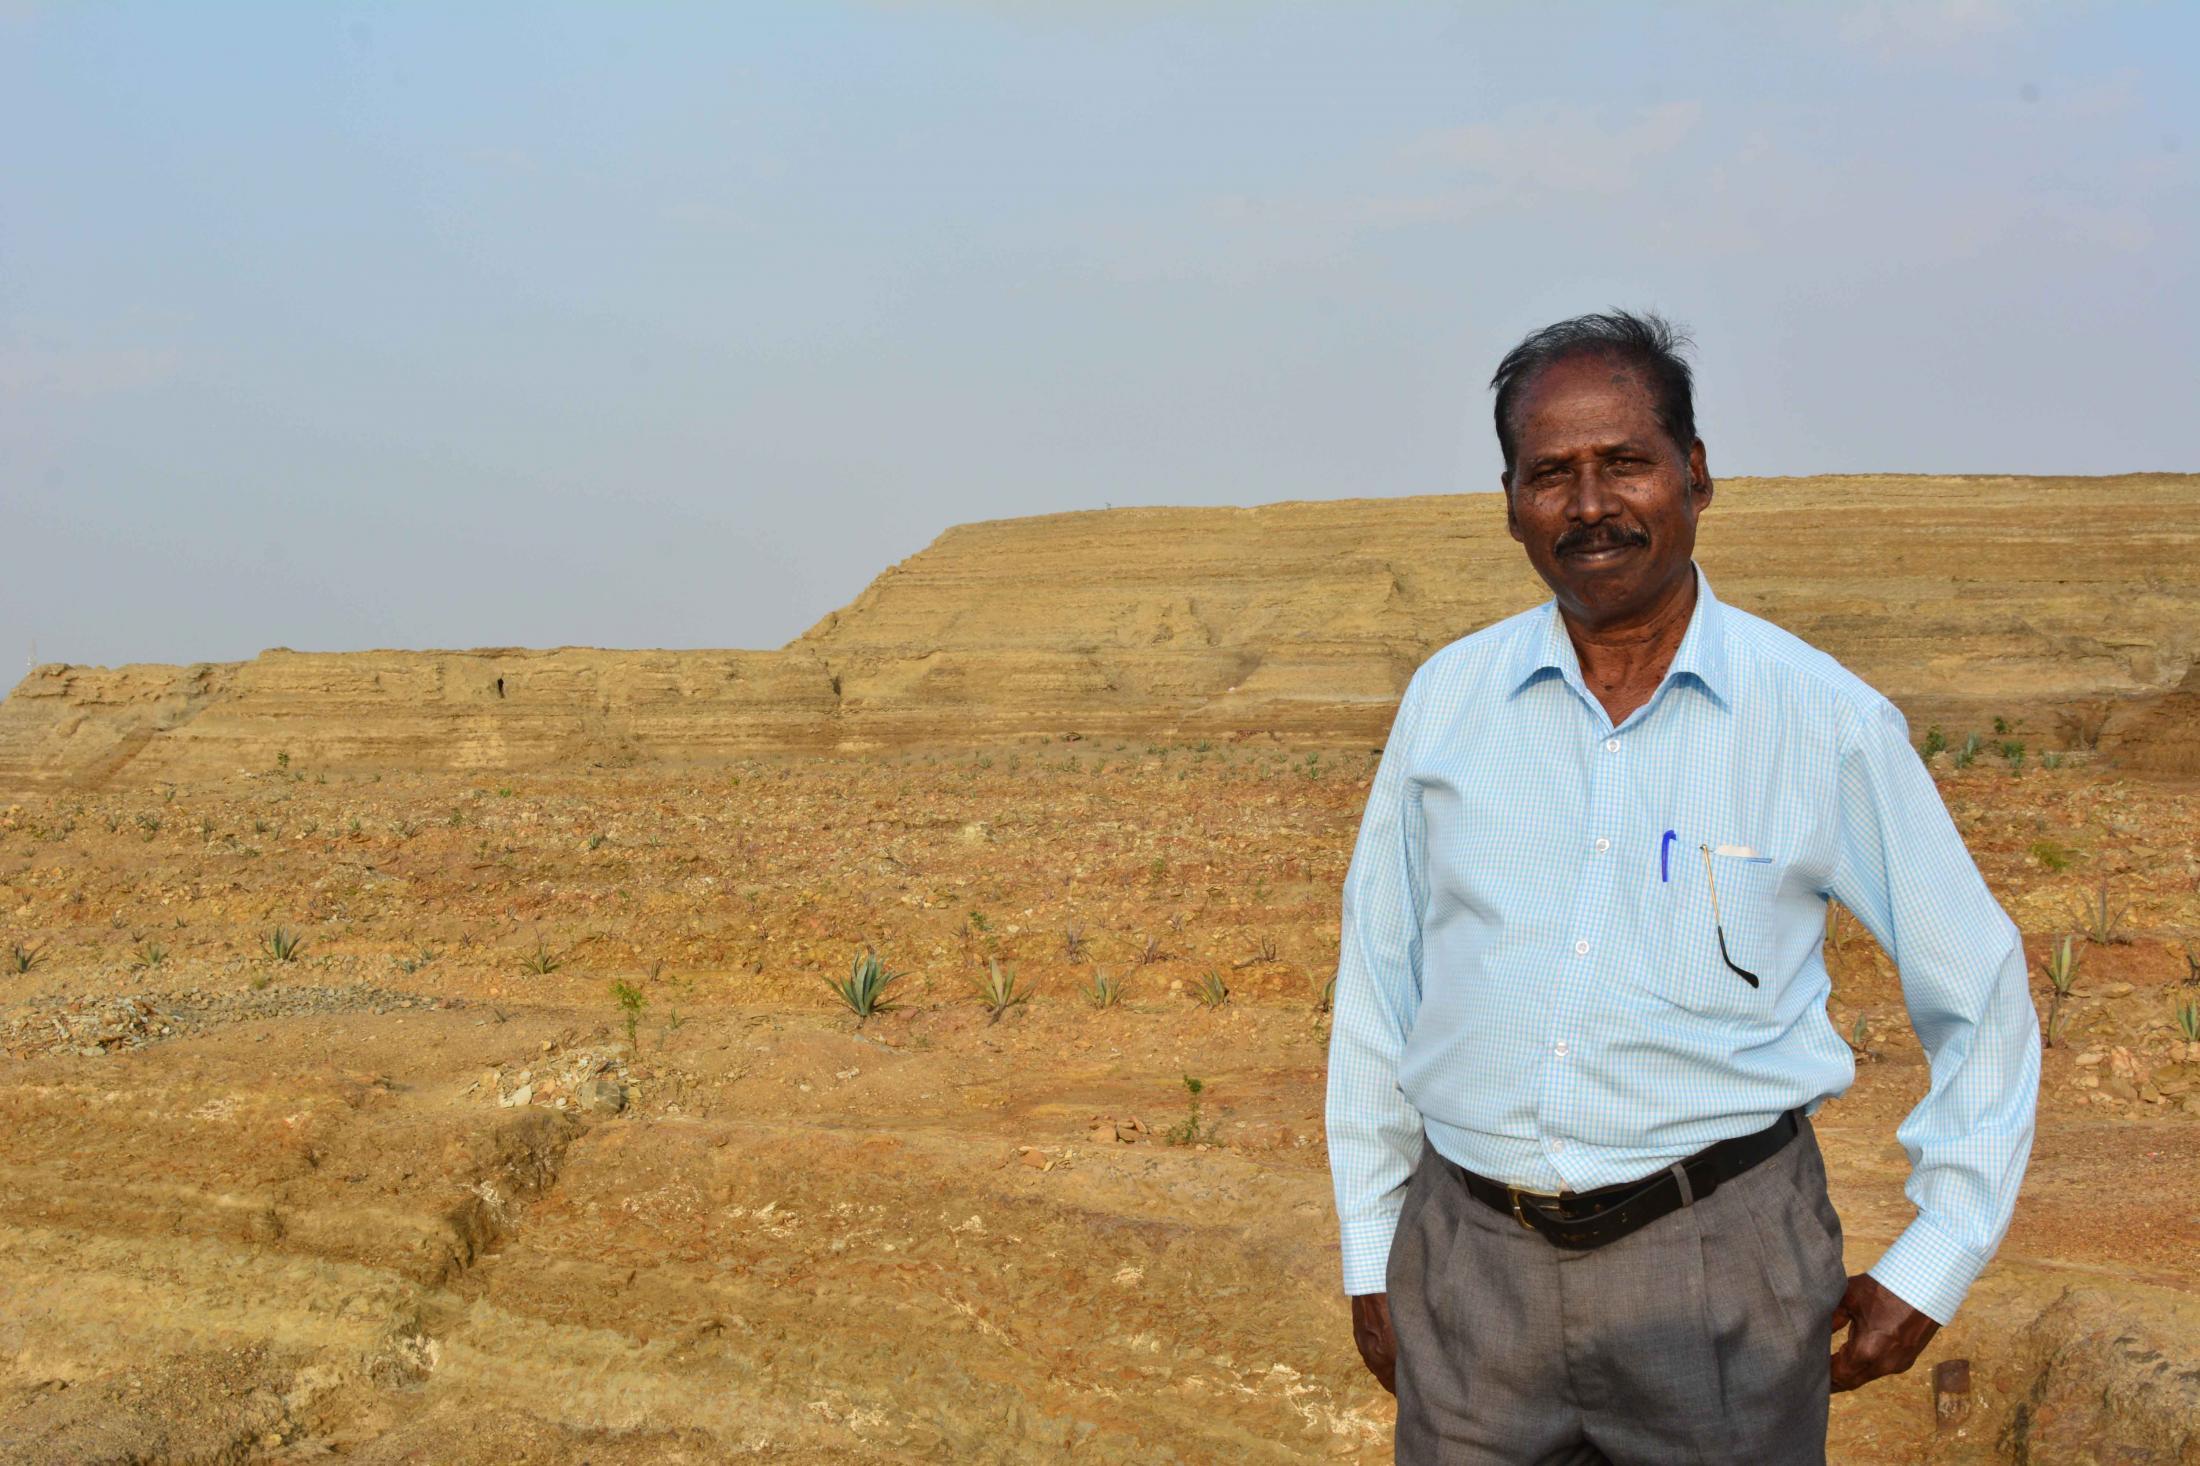 Mr. Selvaraj a miner stands by the cyanide dumps and narrates the history of the mines with pride.